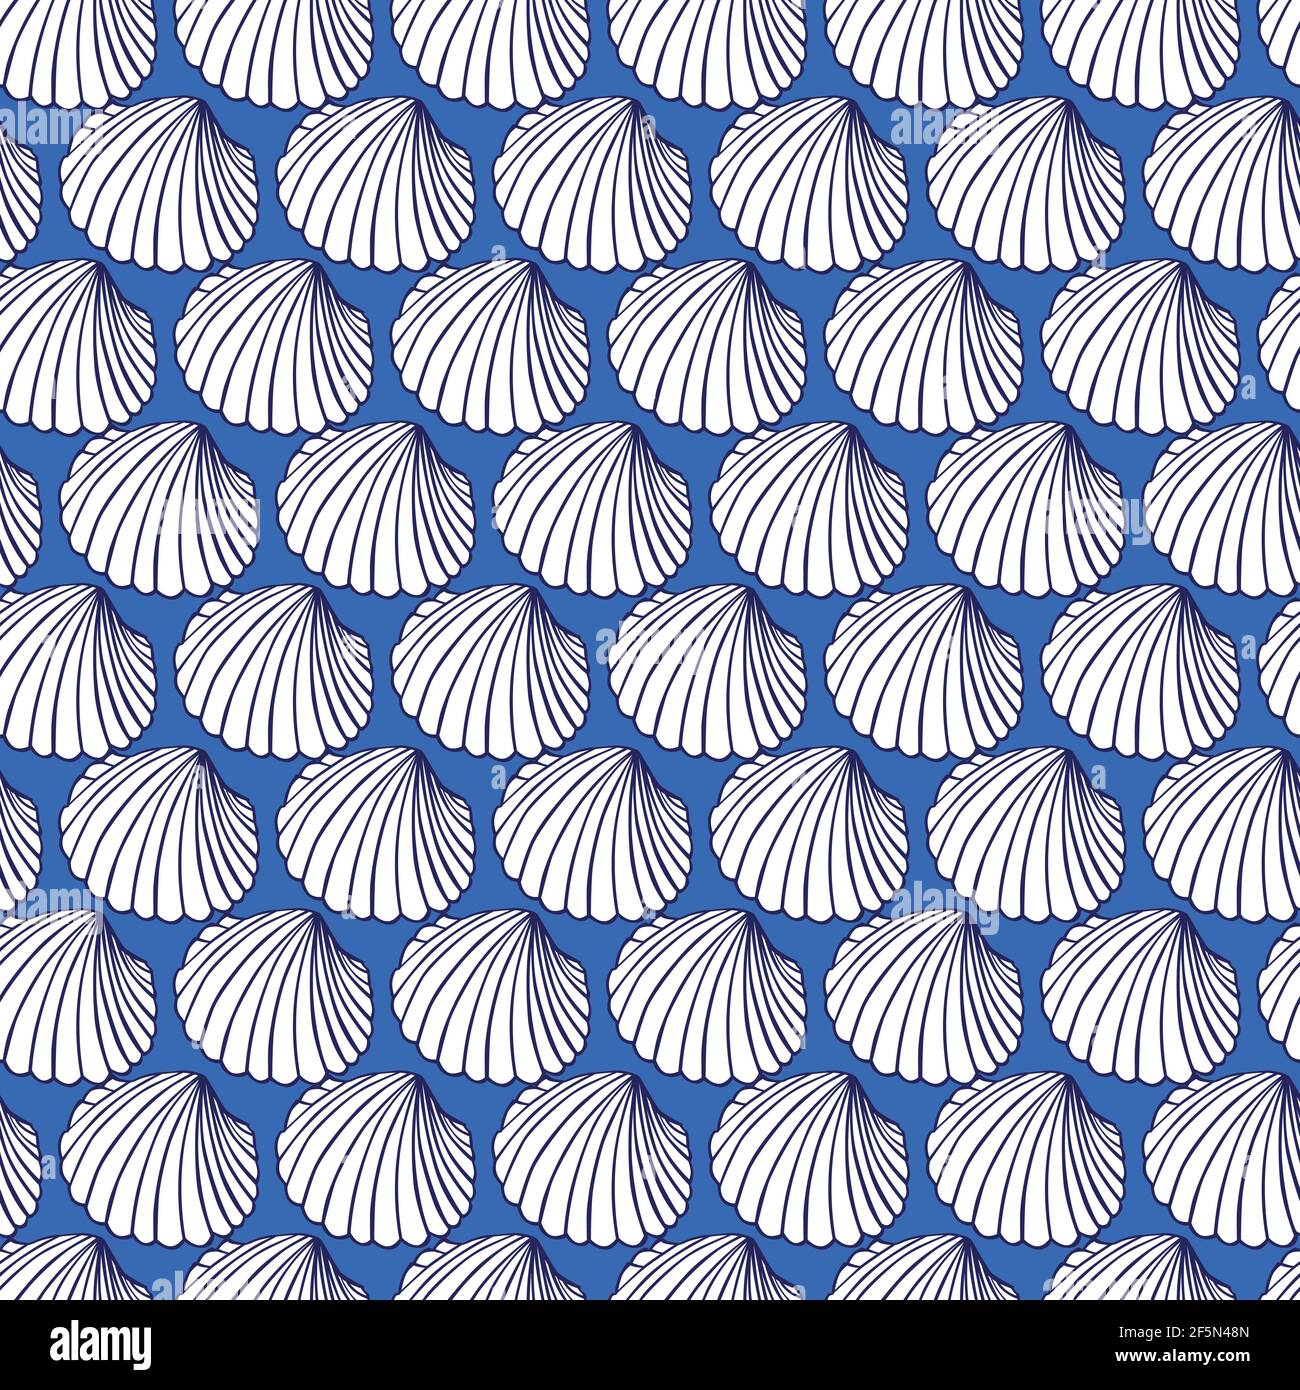 Vector blue rows of cockles clam seashells repeat pattern 05. Suitable for gift wrap, textile and wallpaper. Stock Vector